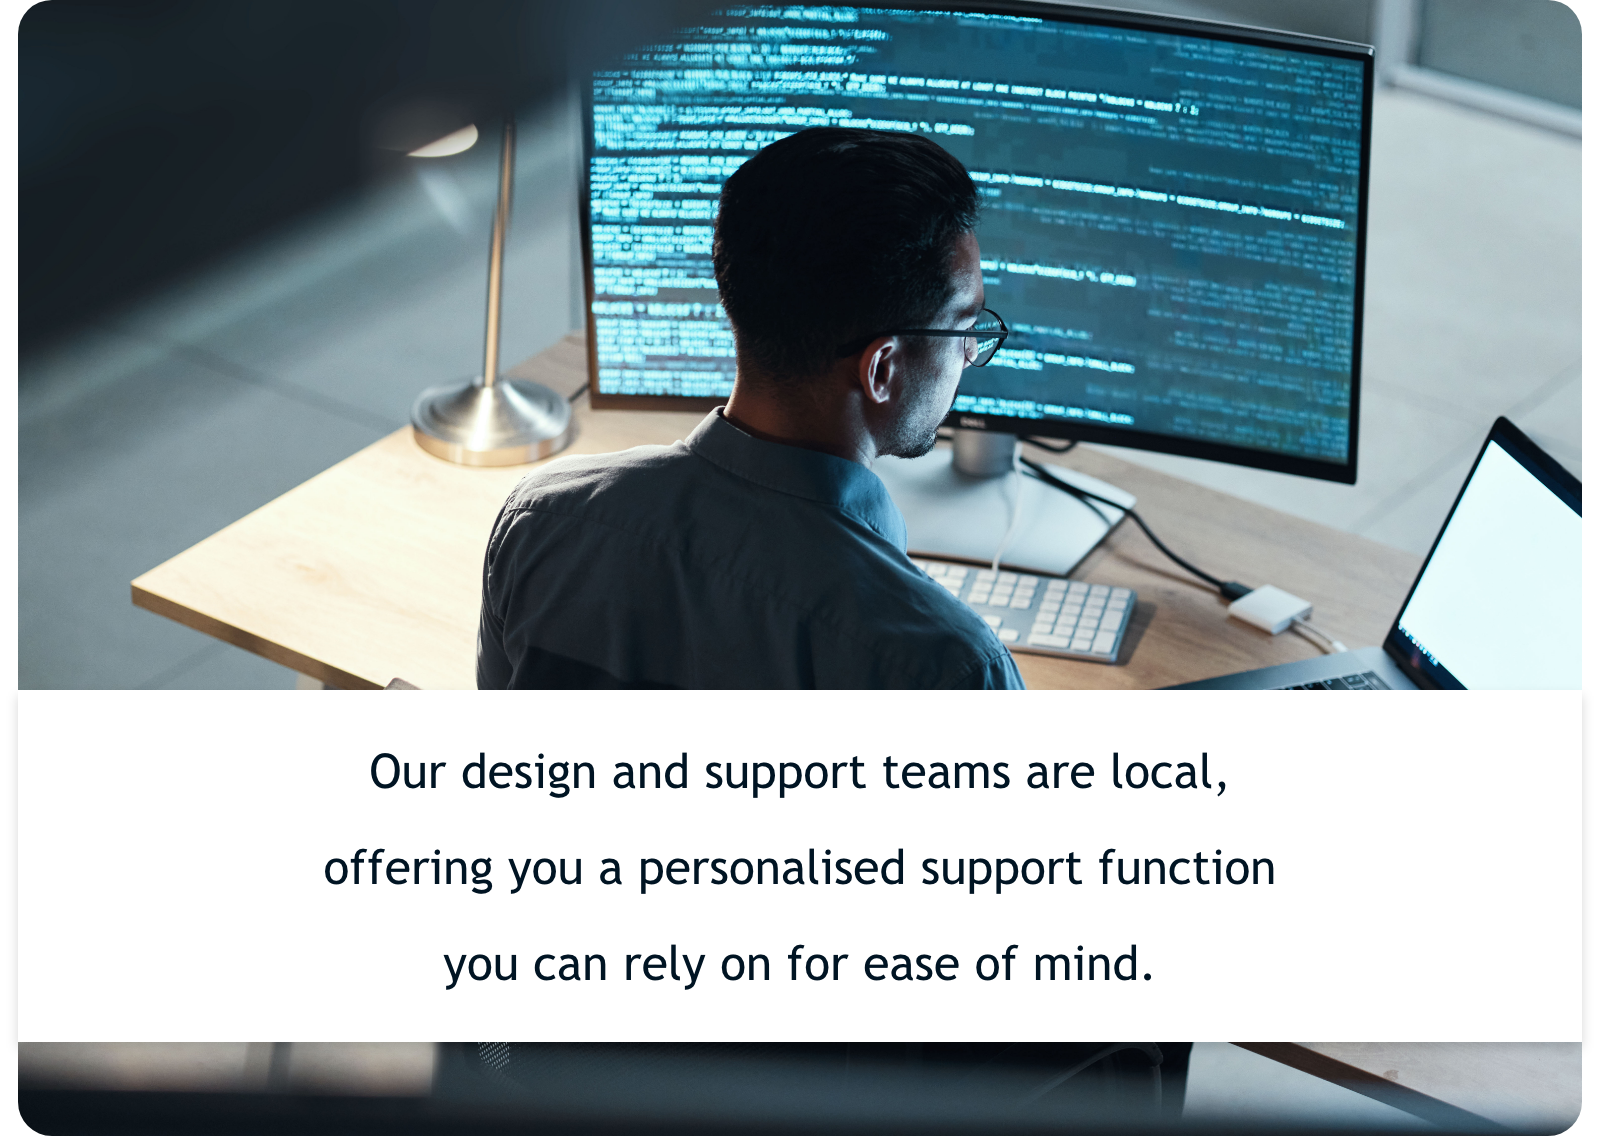 Our design and support teams are local, offering you a personalised support function you can rely on for ease of mind.